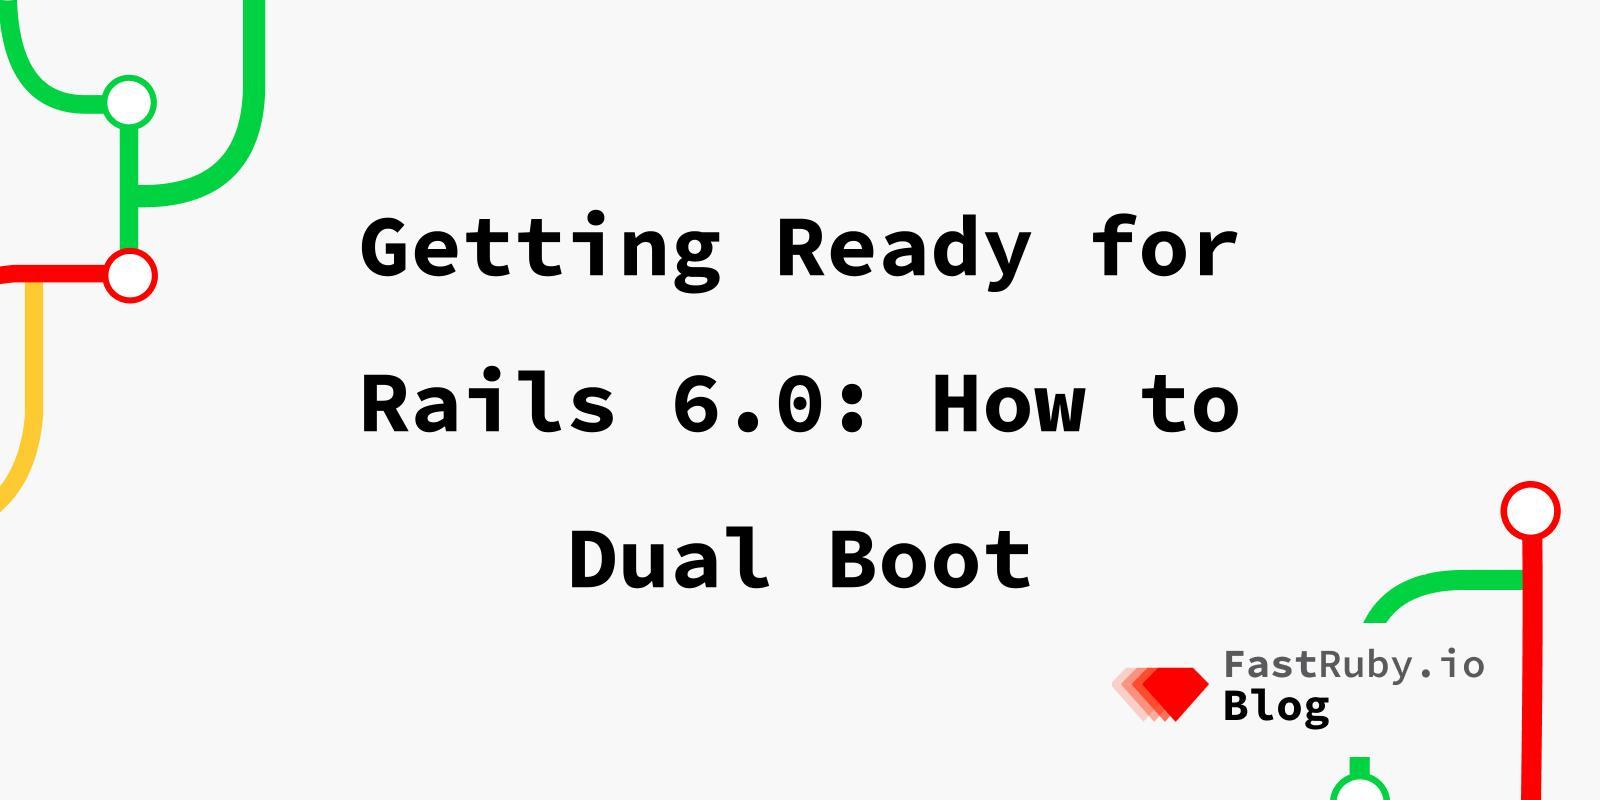 Getting Ready for Rails 6.0: How to Dual Boot